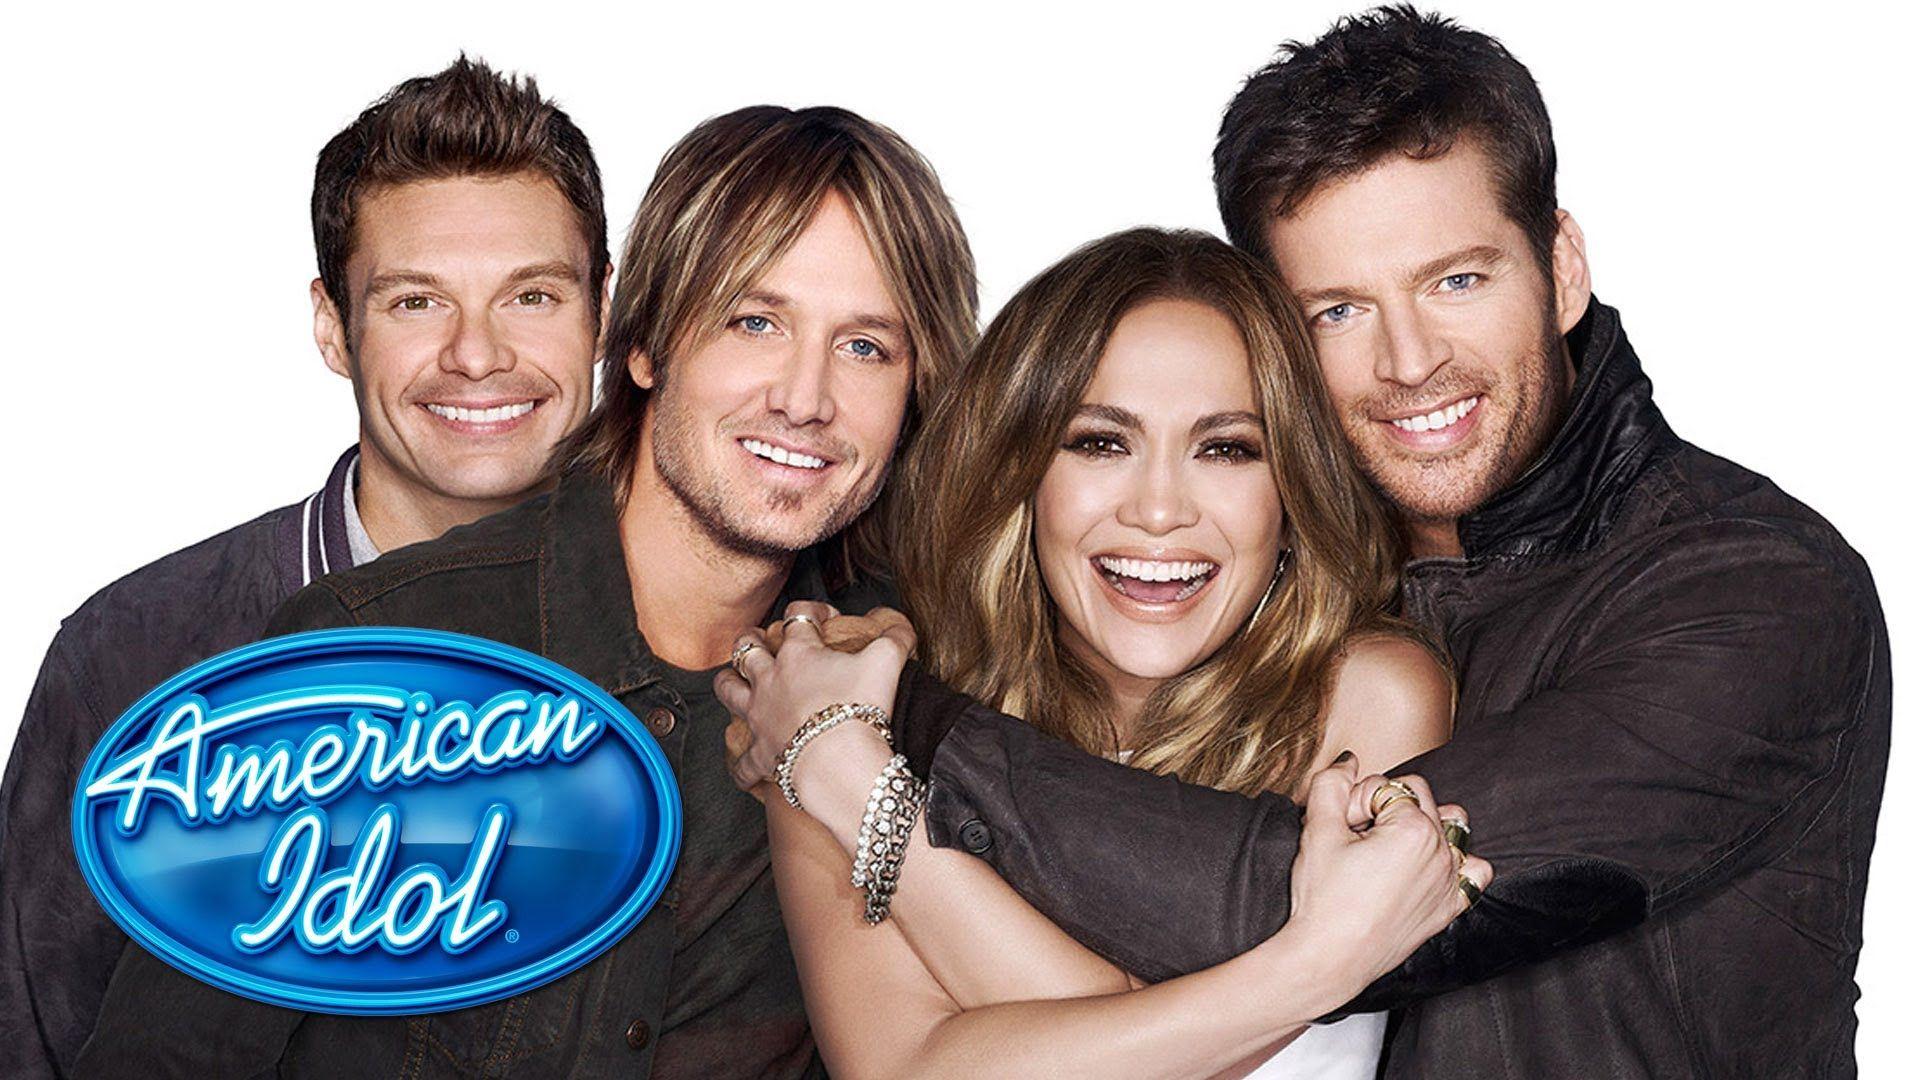 Photo Collection American Idol Judges Wallpaper